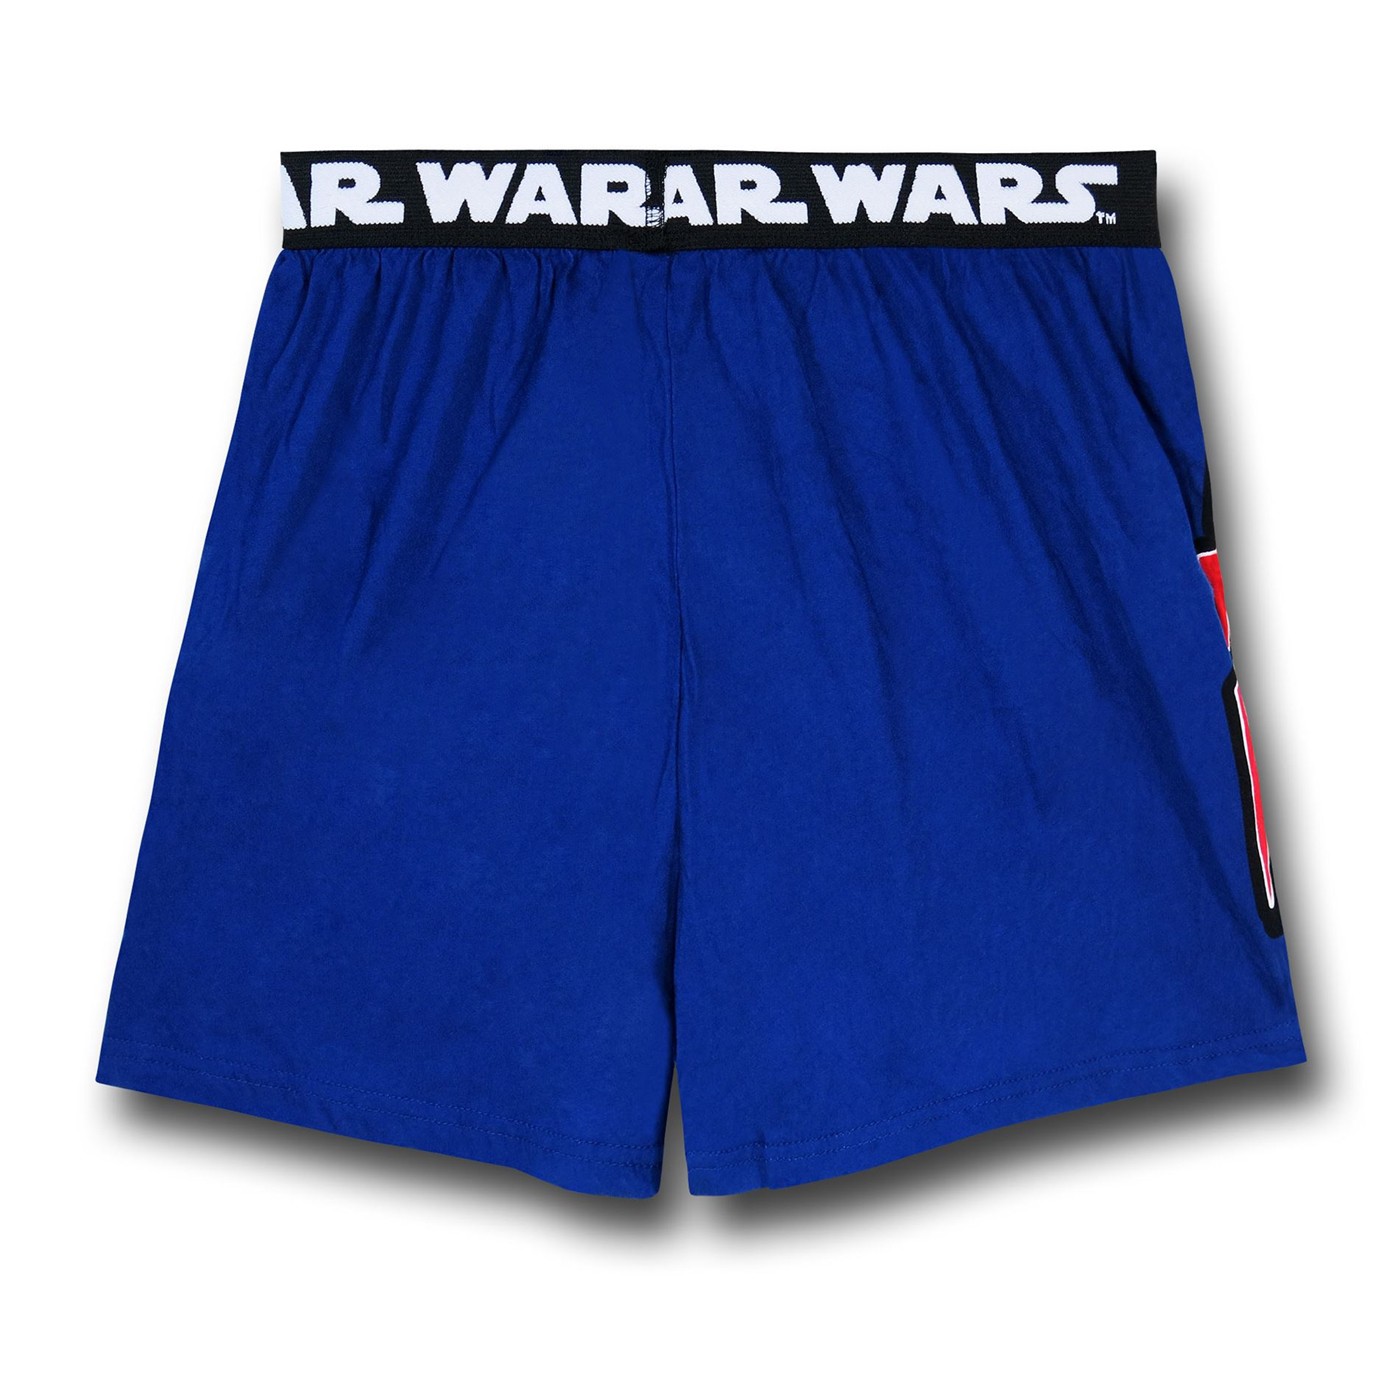 Star Wars For the Wookiee Knit Boxers